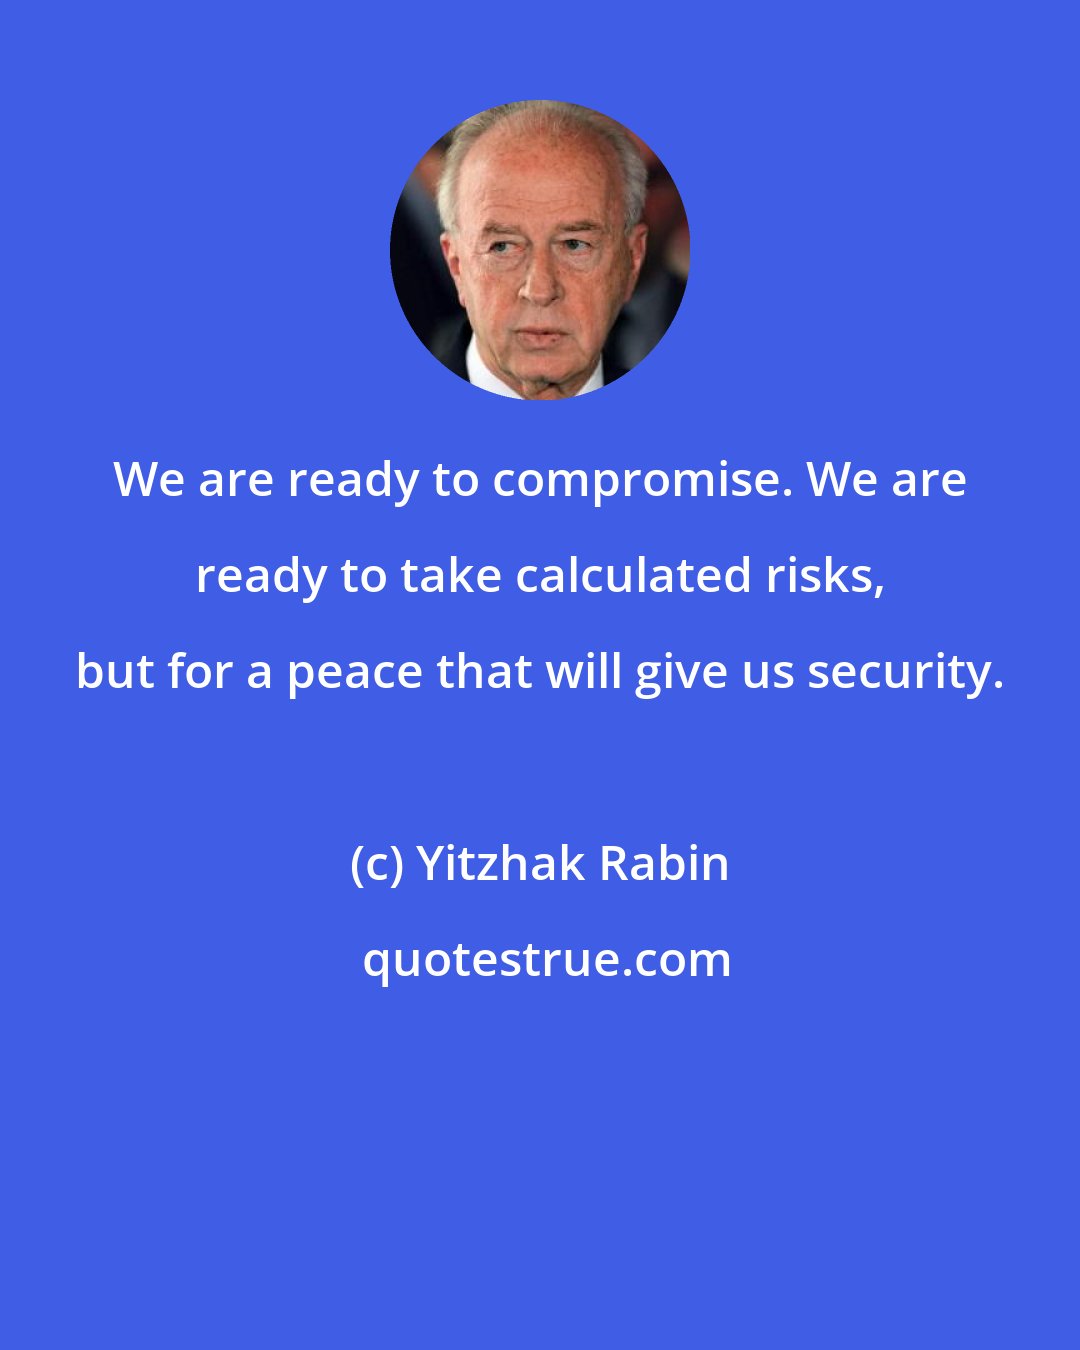 Yitzhak Rabin: We are ready to compromise. We are ready to take calculated risks, but for a peace that will give us security.